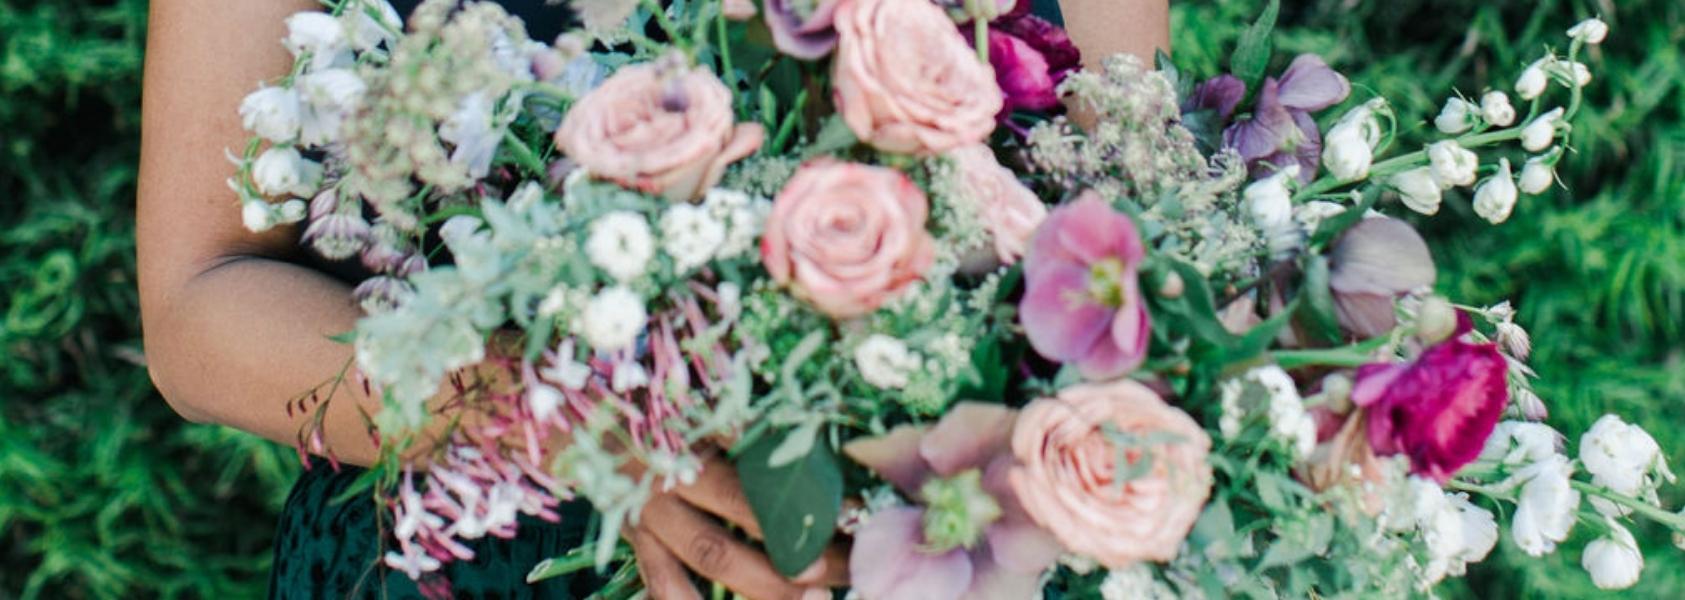 What to Look for When Selecting Your Floral Designer